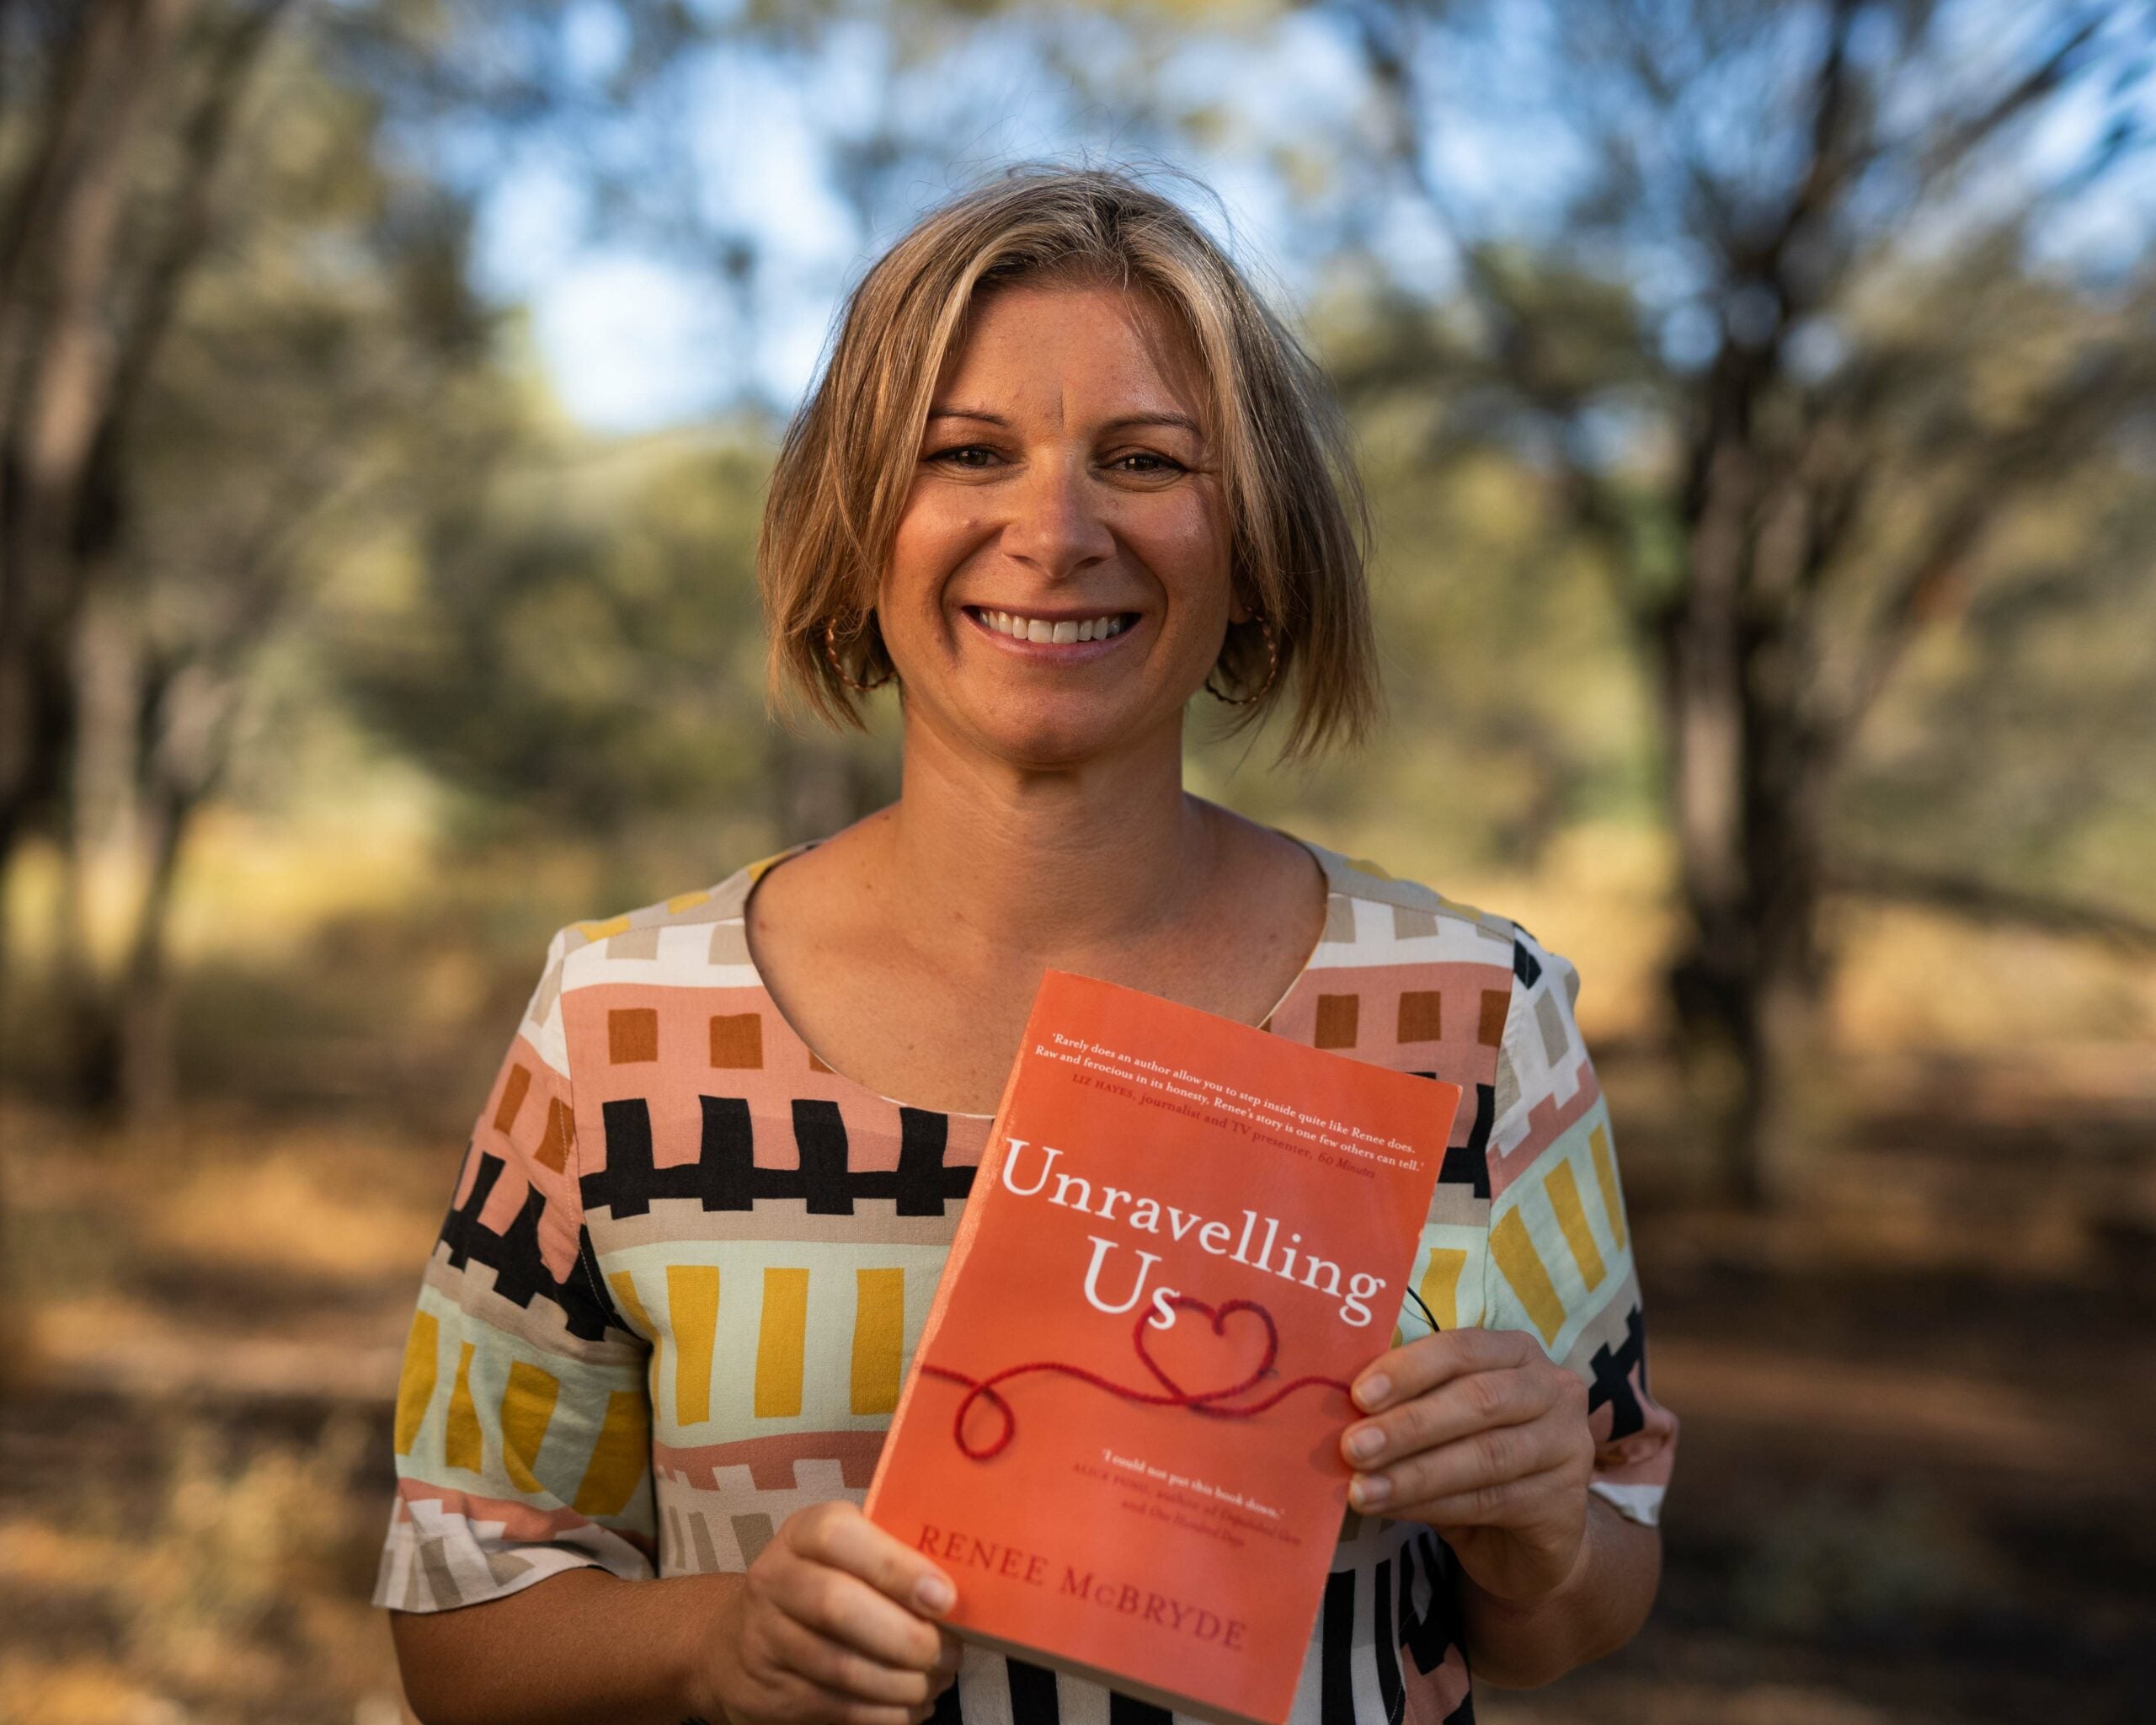 Book Club - Unravelling us to be discussed on 2 June at 7pm with Renee McBryde (Zoom online Meeting)